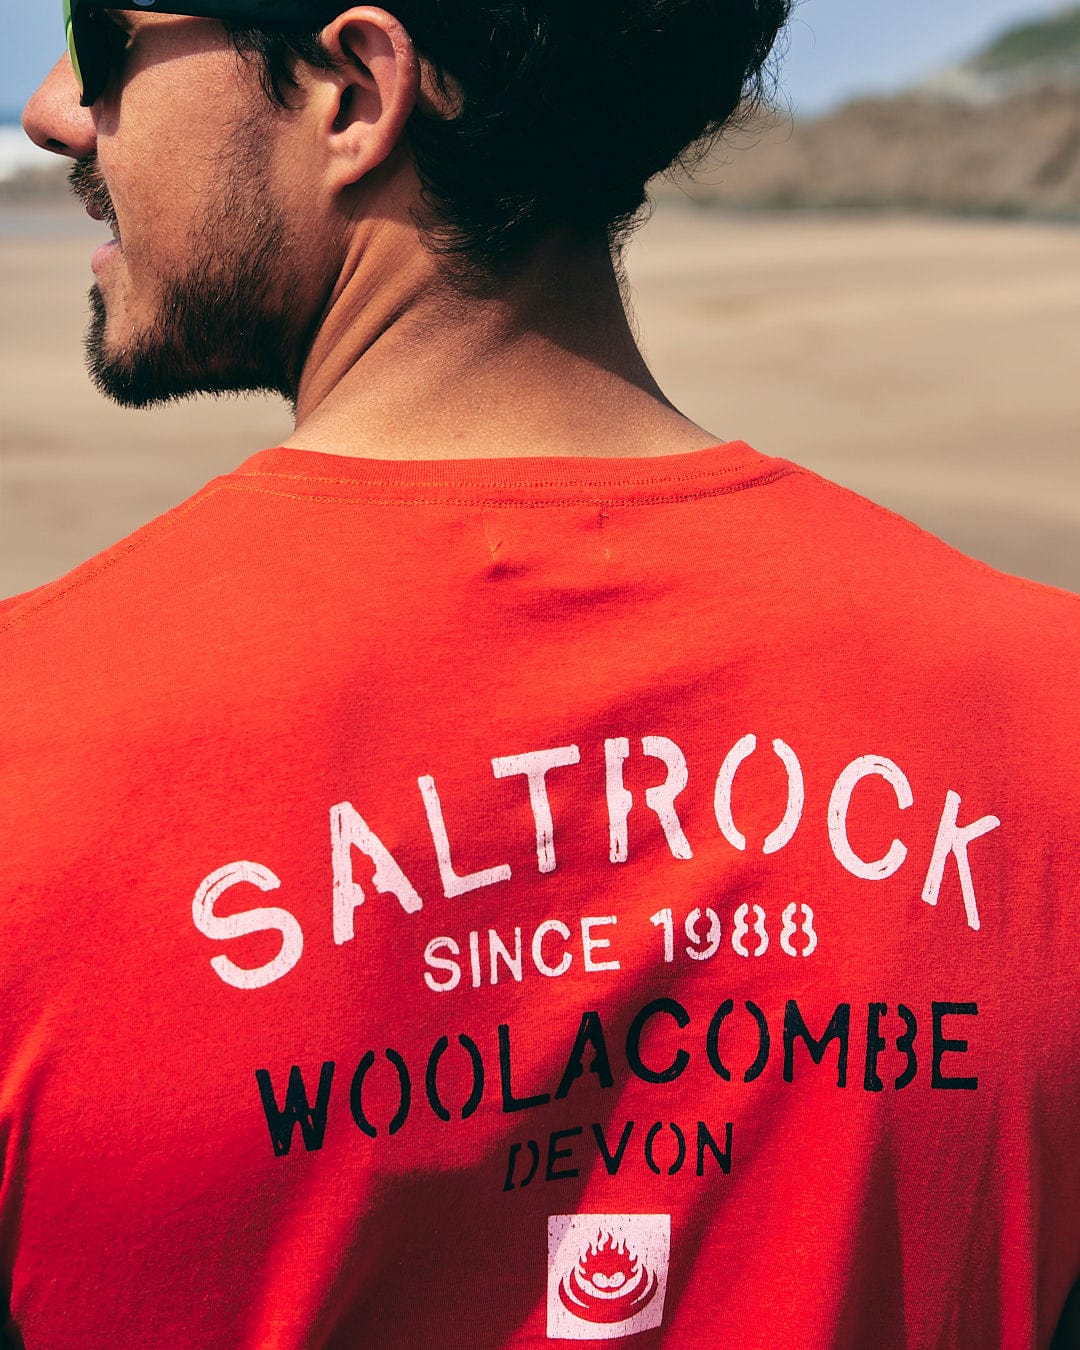 A man wearing a red t-shirt that says Saltrock Woolacombe Wool Devon.